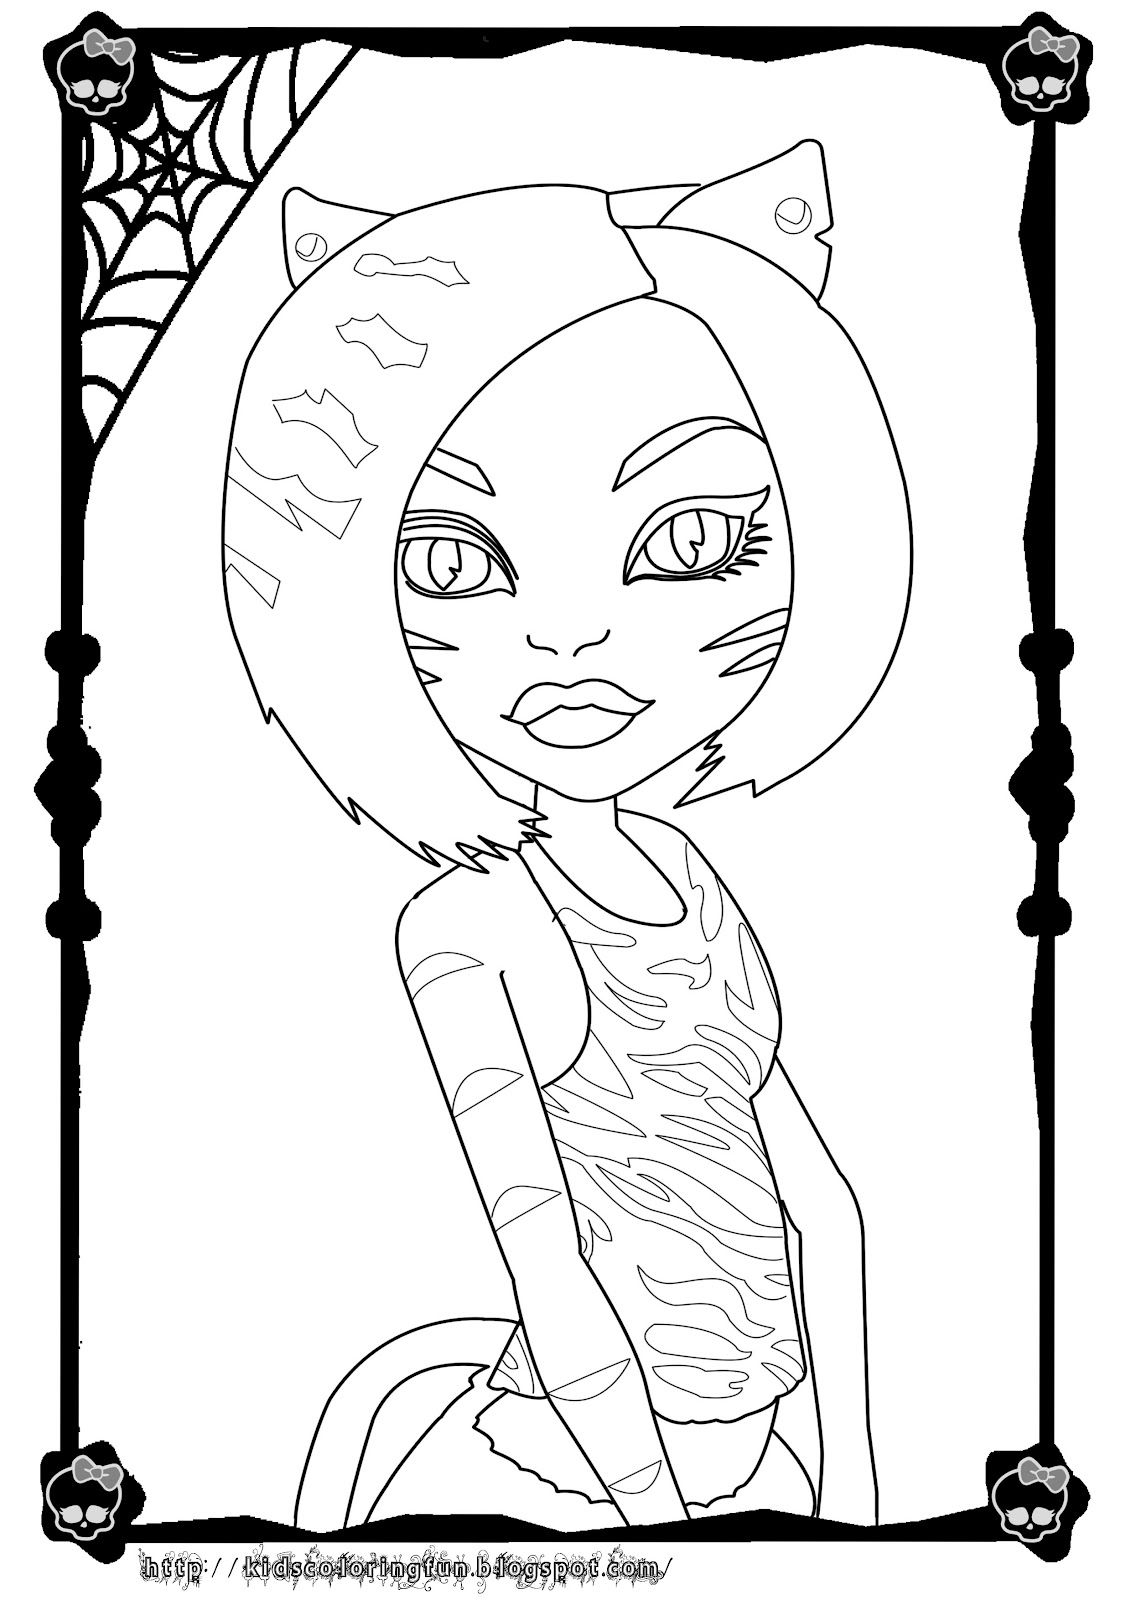 Monster High Coloring Pages Free Printable Monster High Coloring Pages To Print At Getdrawings Free For